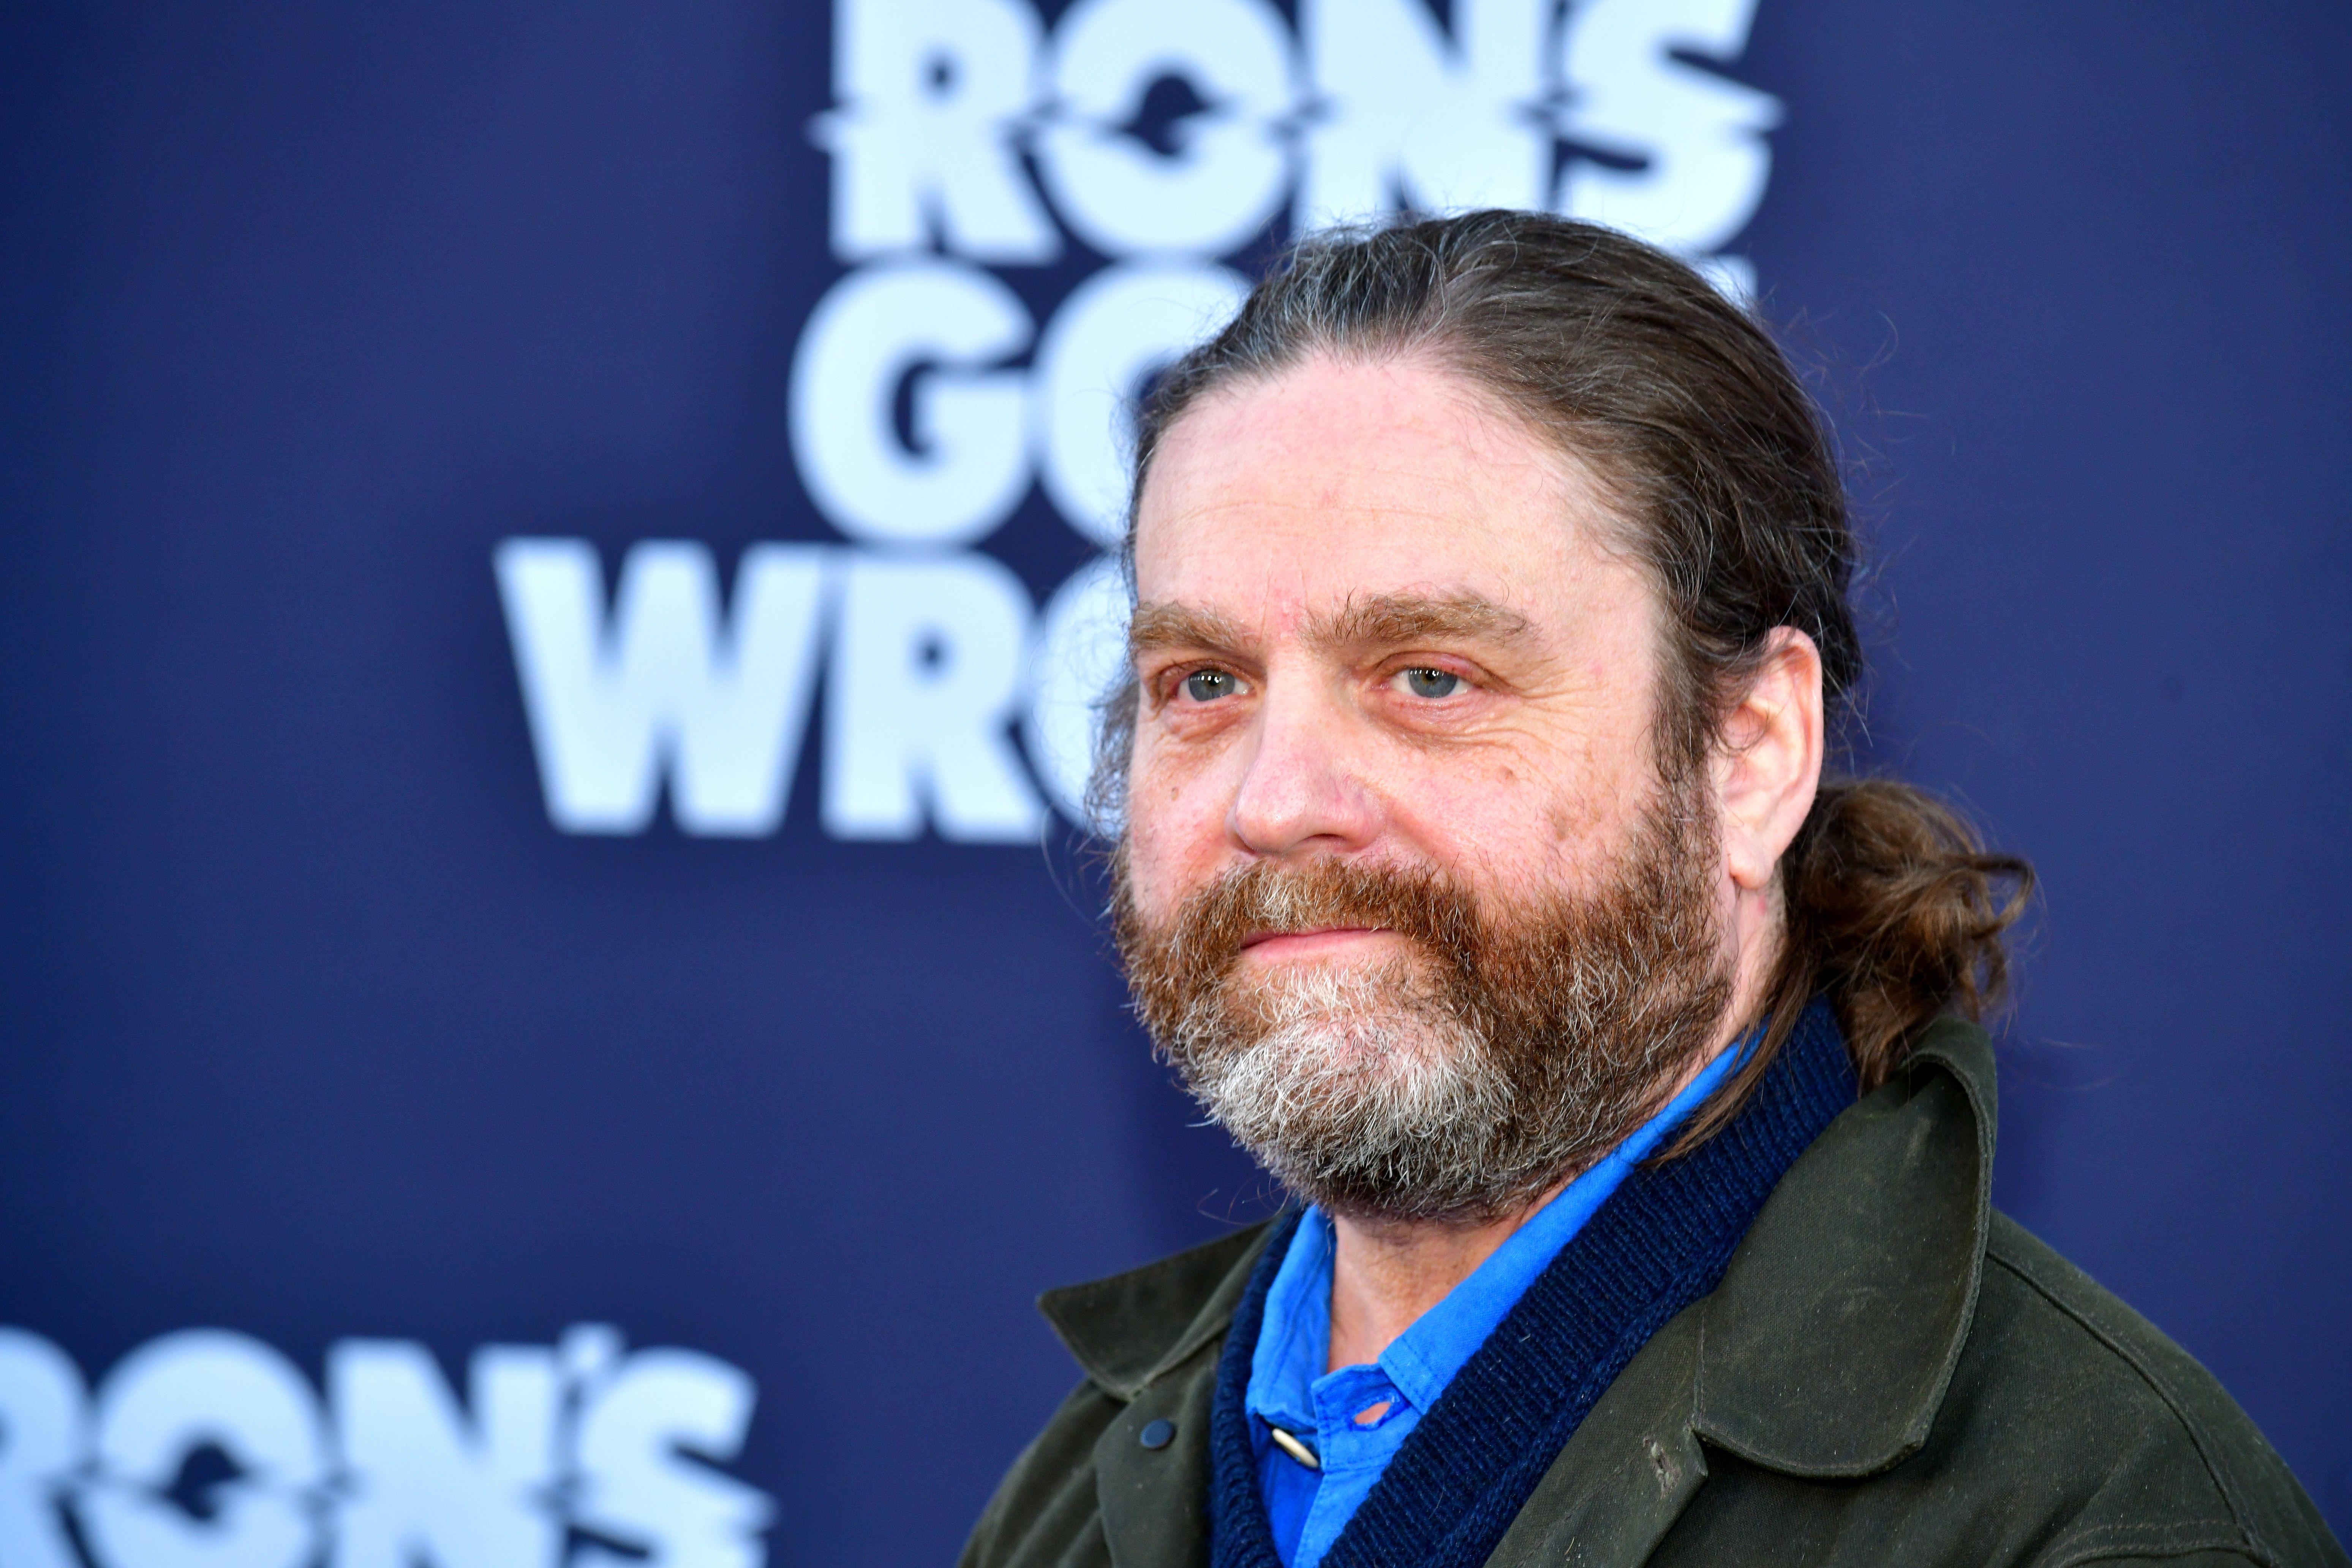 Zach Galifianakis at the  "Ron's Gone Wrong" premiere. Hosted at El Capitan Theatre in LA, California on October 19, 2021 | Source: Getty Images